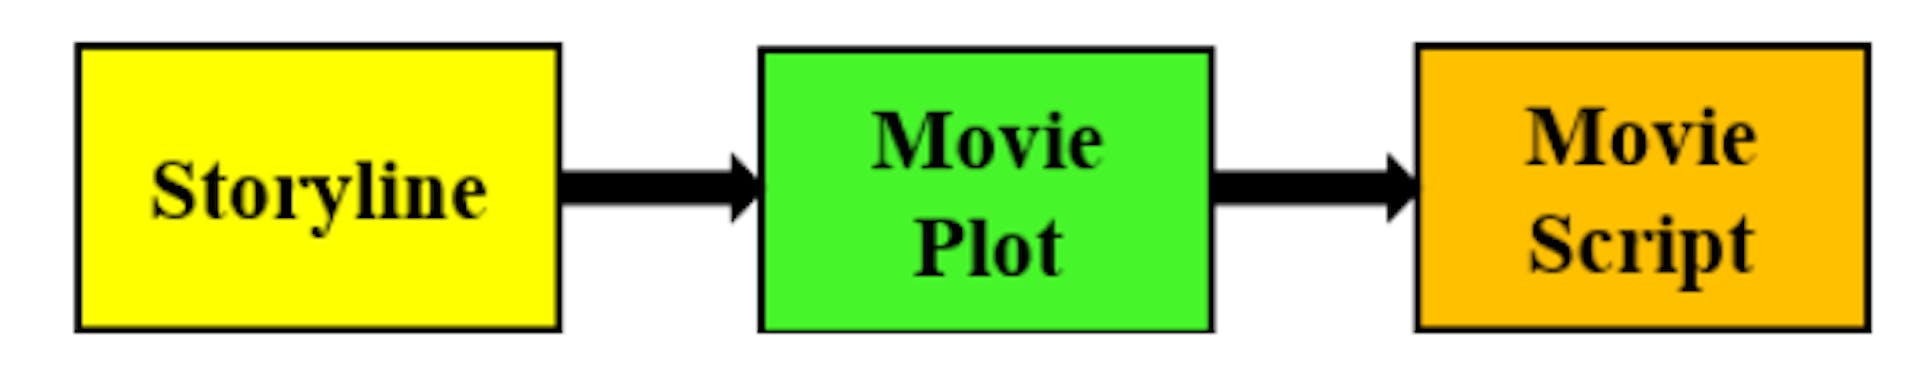 Figure 1: The thought process a scriptwriter follows in creating a movie script. An idea (storyline) leads to a plot which is then converted into a movie script.